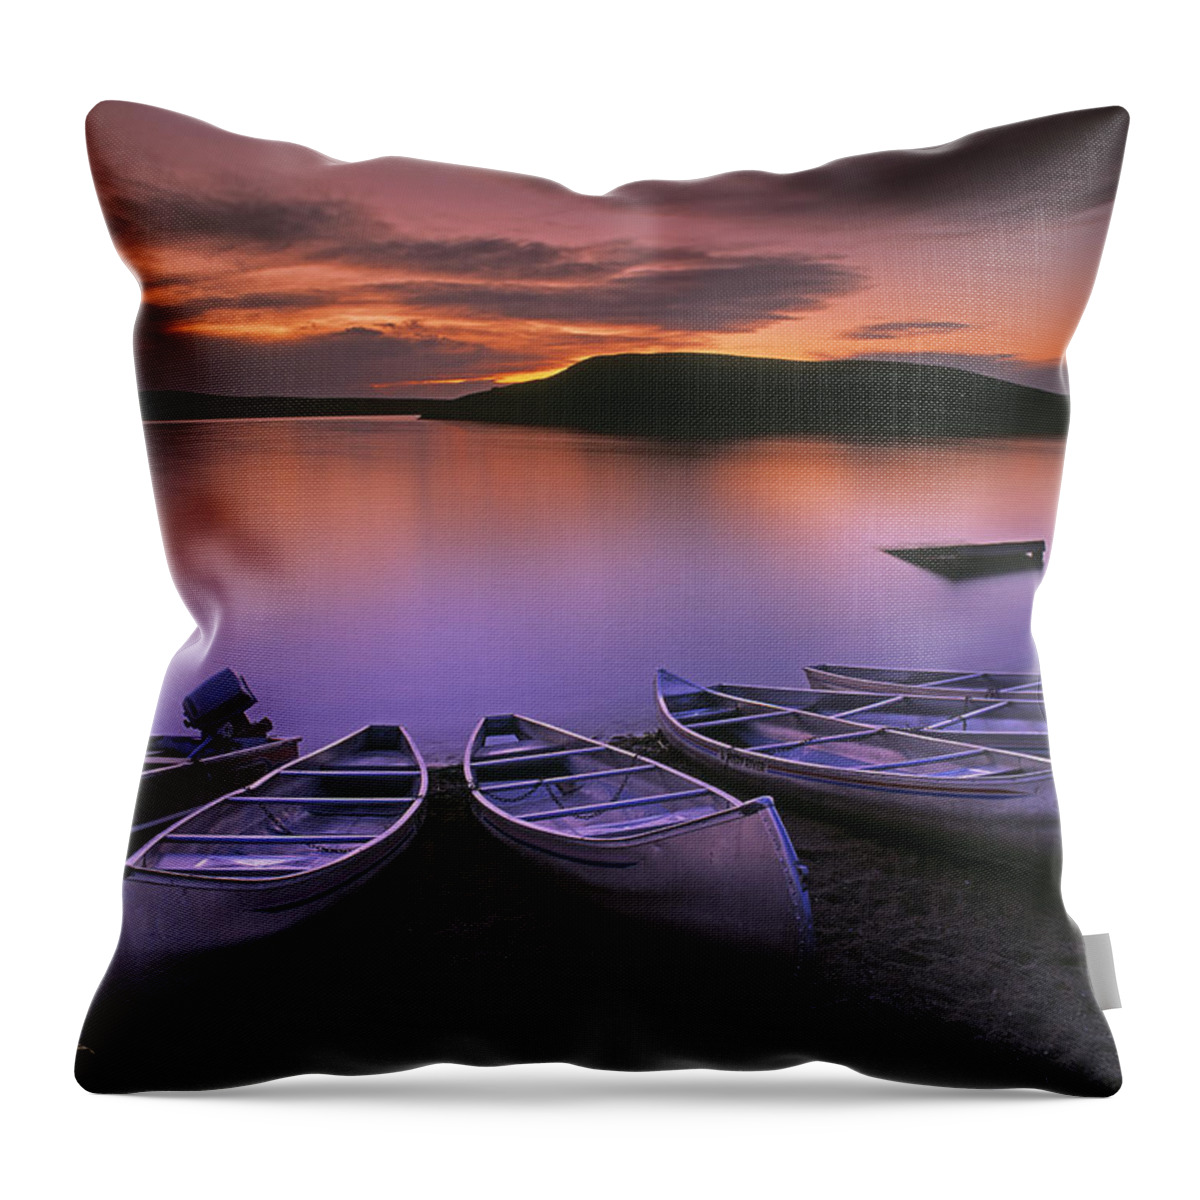 Calming Throw Pillow featuring the photograph D.wiggett Canoes On Shore, Pink And by First Light